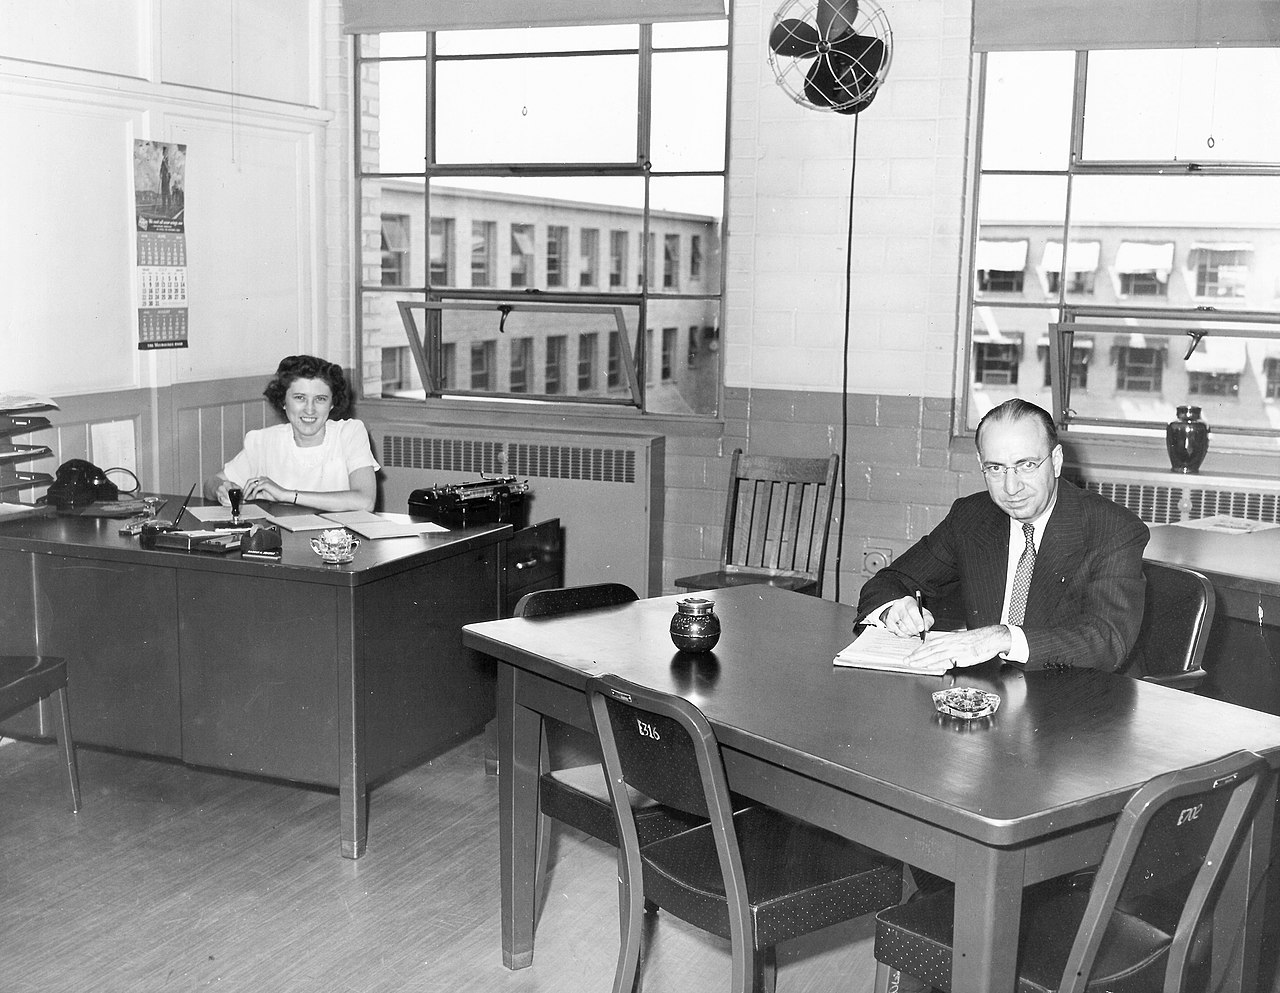 "Office of the Commanding Officer, Twin Cities Ordnance Plant, St. Paul, - Minneapolis", Minnesota. Shows office at Twin Cities Ordnance Plant that was located in New Brighton, Minnesota during World War II. The man seated at desk is "engineering manager" Raymond M. Winslow. (Wikipedia)